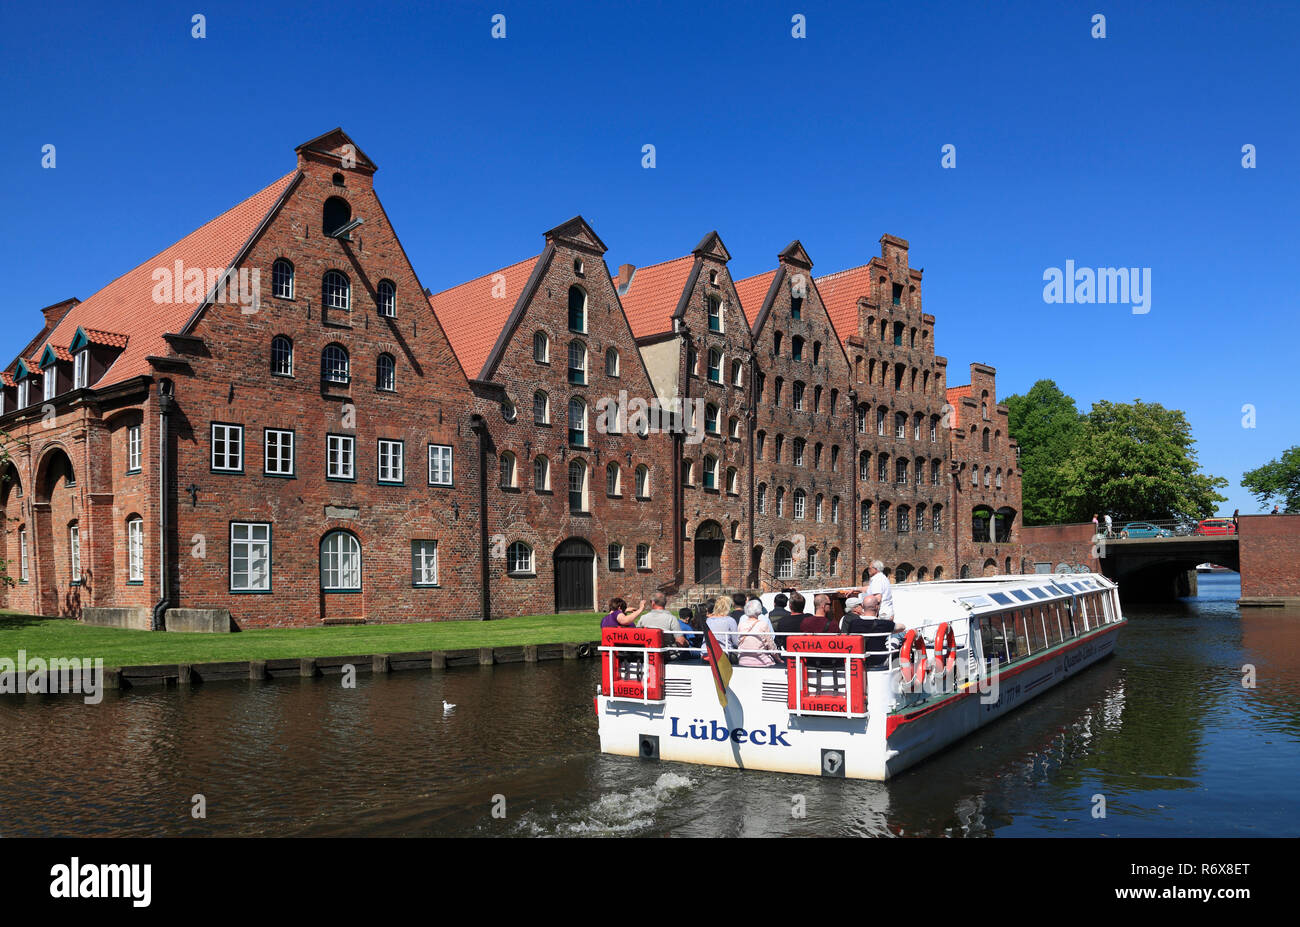 Tourist sightseeing ship in front of historic salt storages at river Trave, Lübeck, Luebeck, Schleswig-Holstein, Germany, Europe Stock Photo